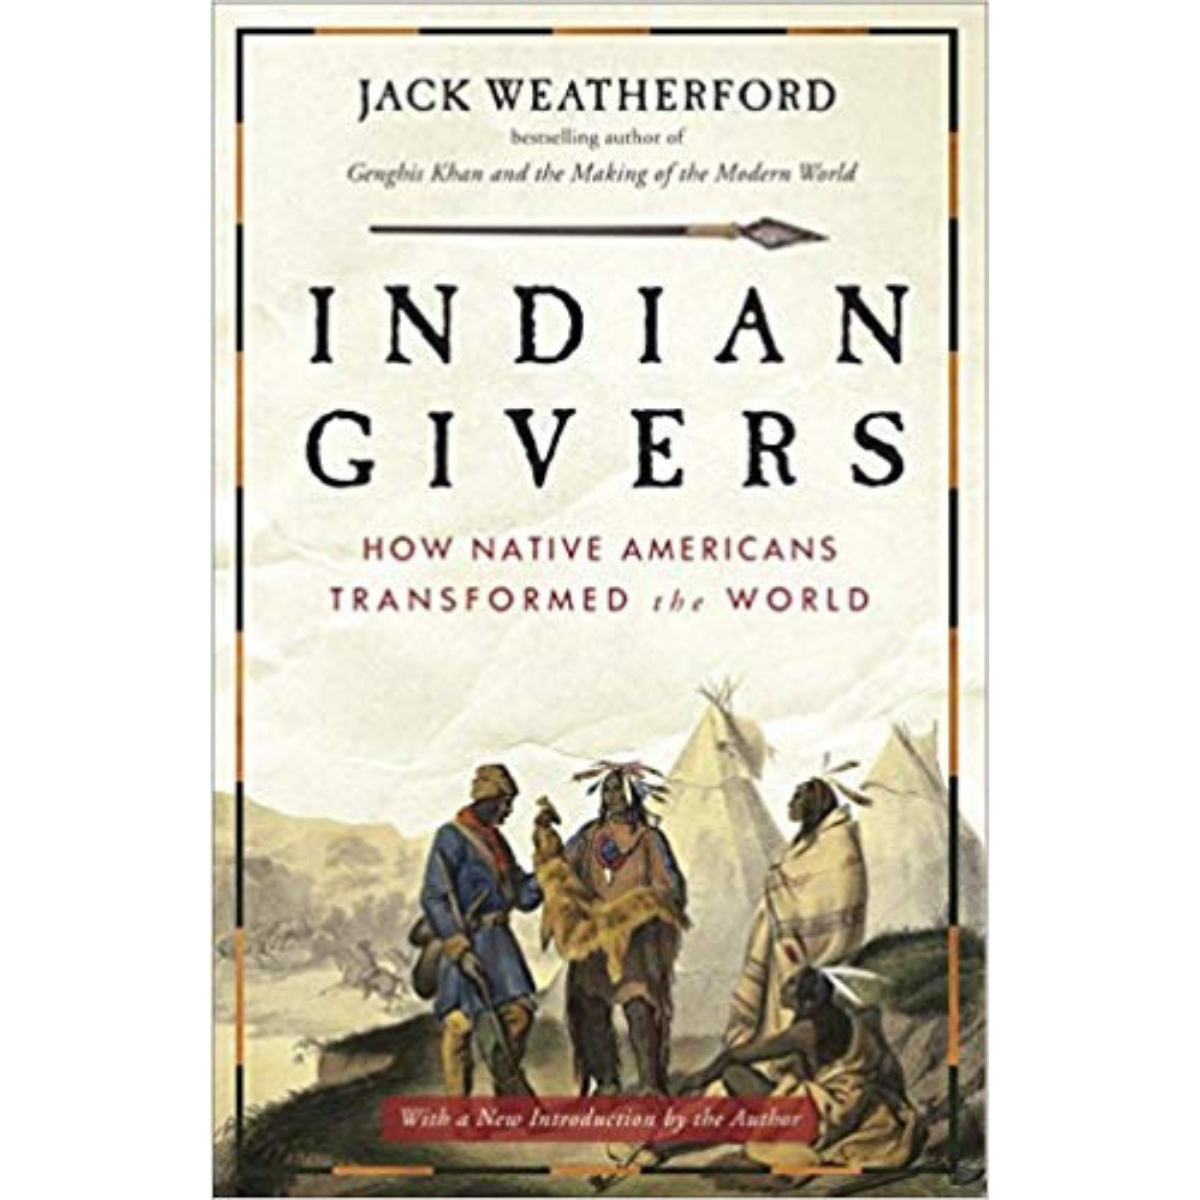 Indian Givers - How Native Americans Transformed the World